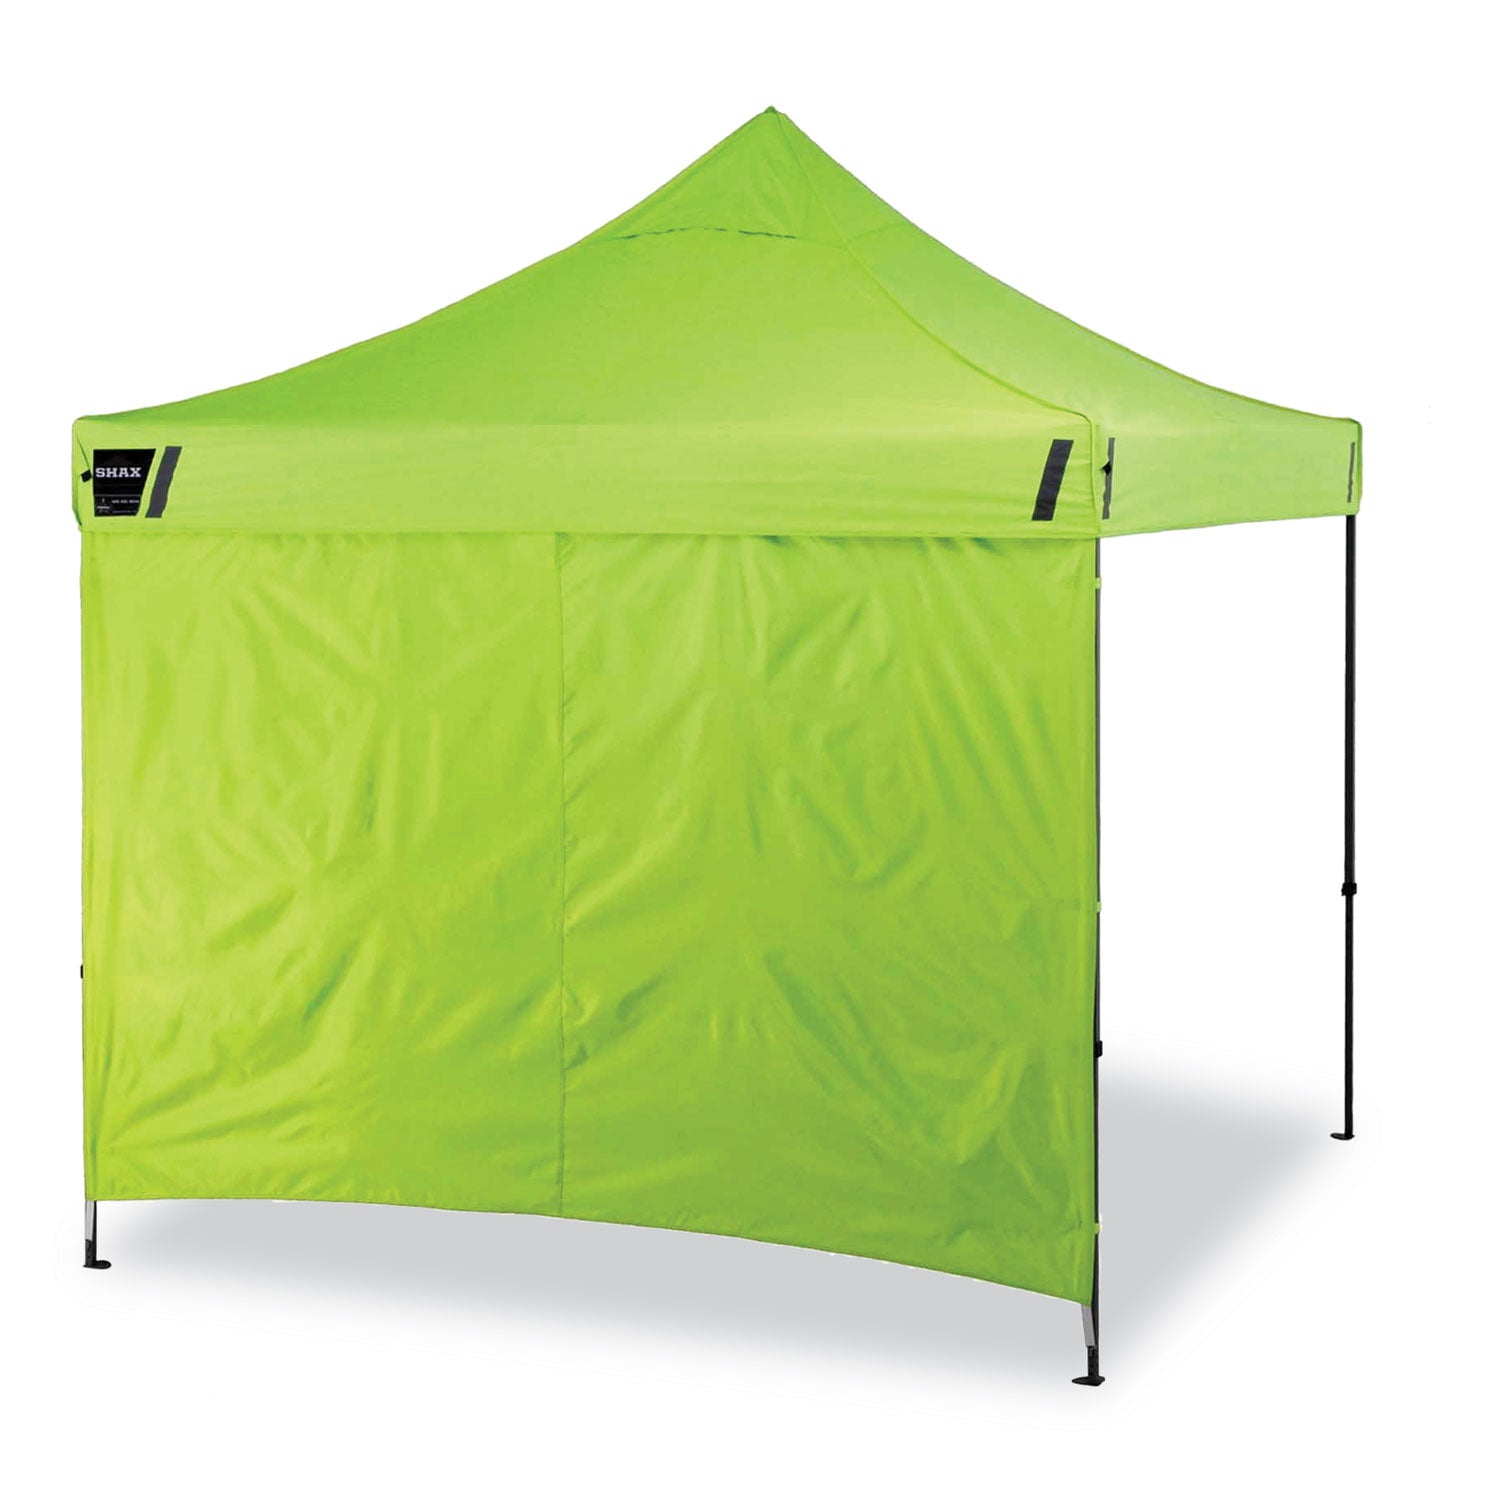 shax-6051-heavy-duty-pop-up-tent-kit-single-skin-10-ft-x-10-ft-polyester-steel-lime-ships-in-1-3-business-days_ego12951 - 7